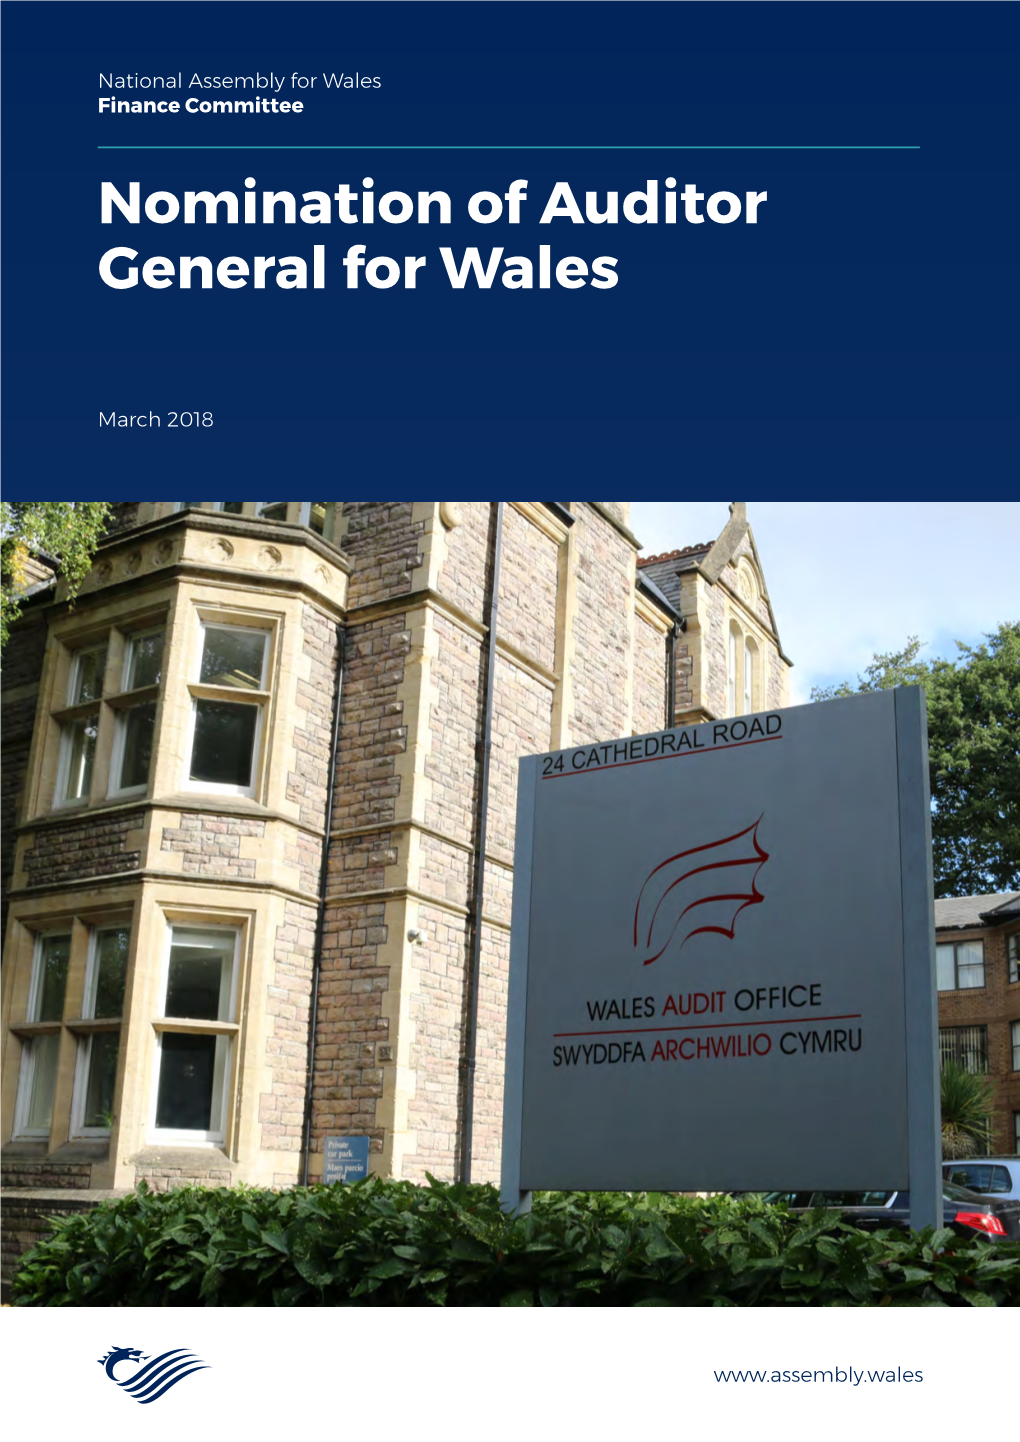 Nomination of Auditor General for Wales